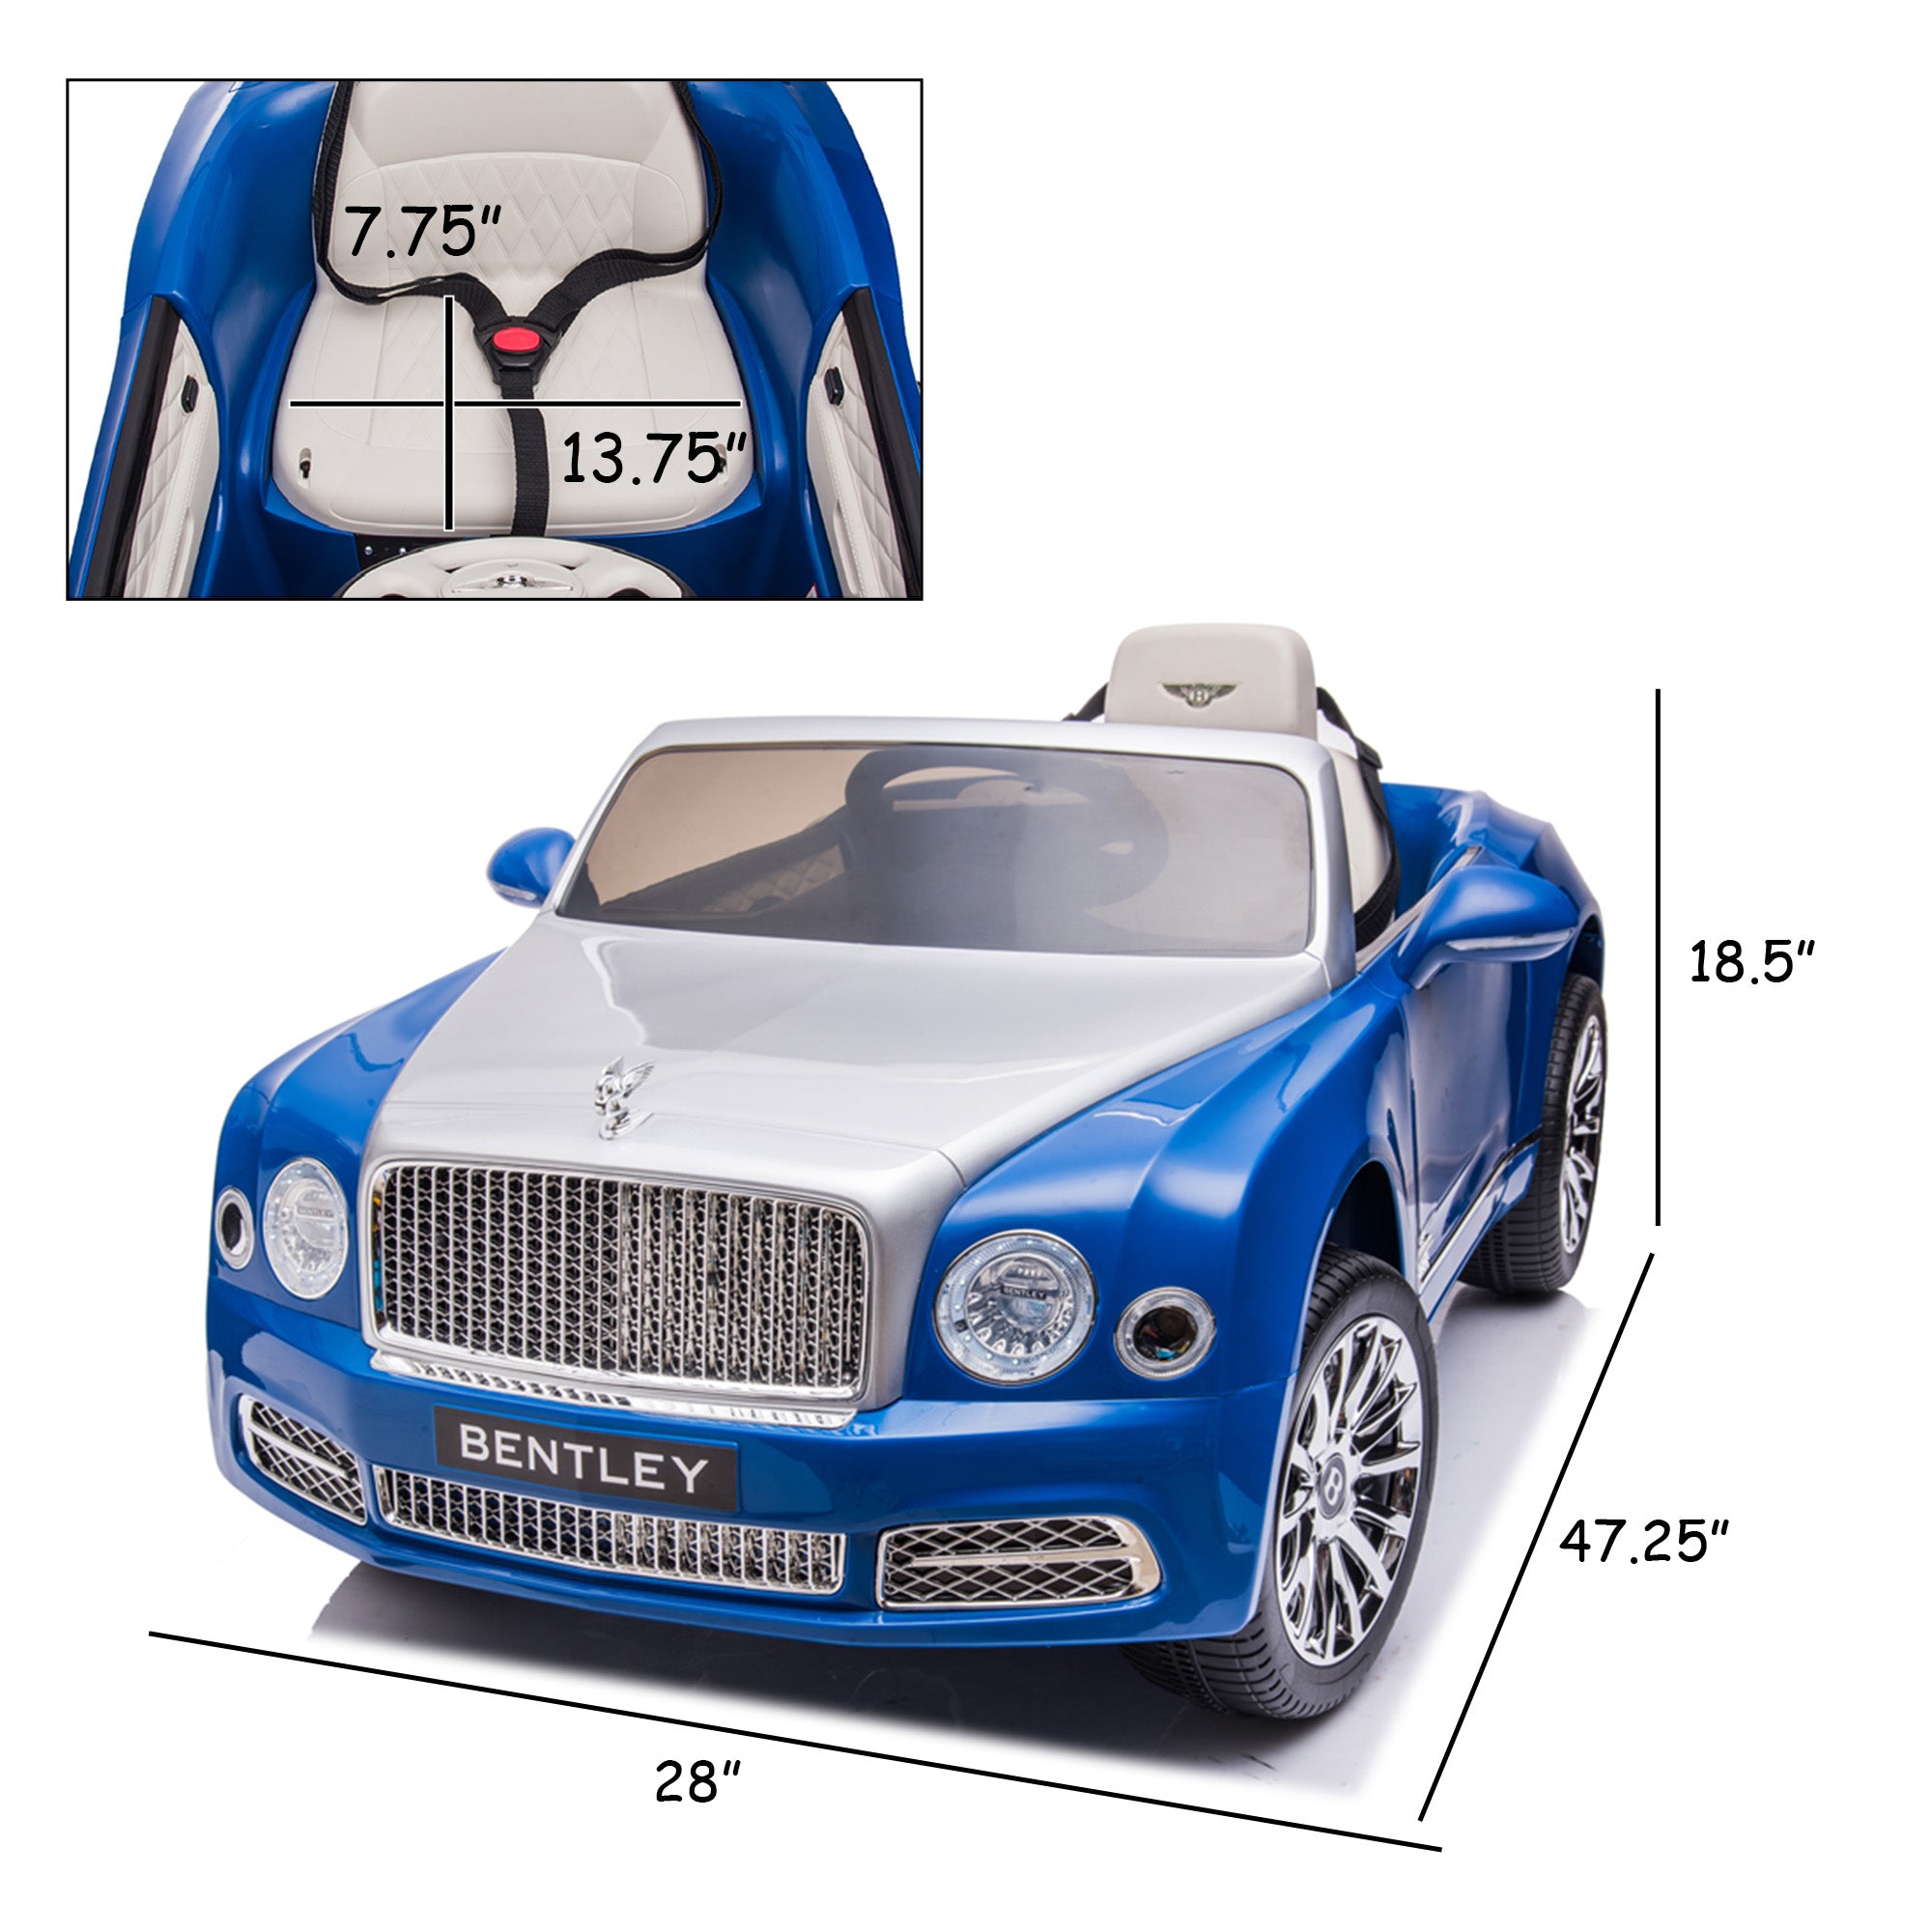 ZNTS 12V Electric Kid Ride On, Bentley Mulsanne Licenseds for Kids, Battery Powered Kids Ride-on W162982643